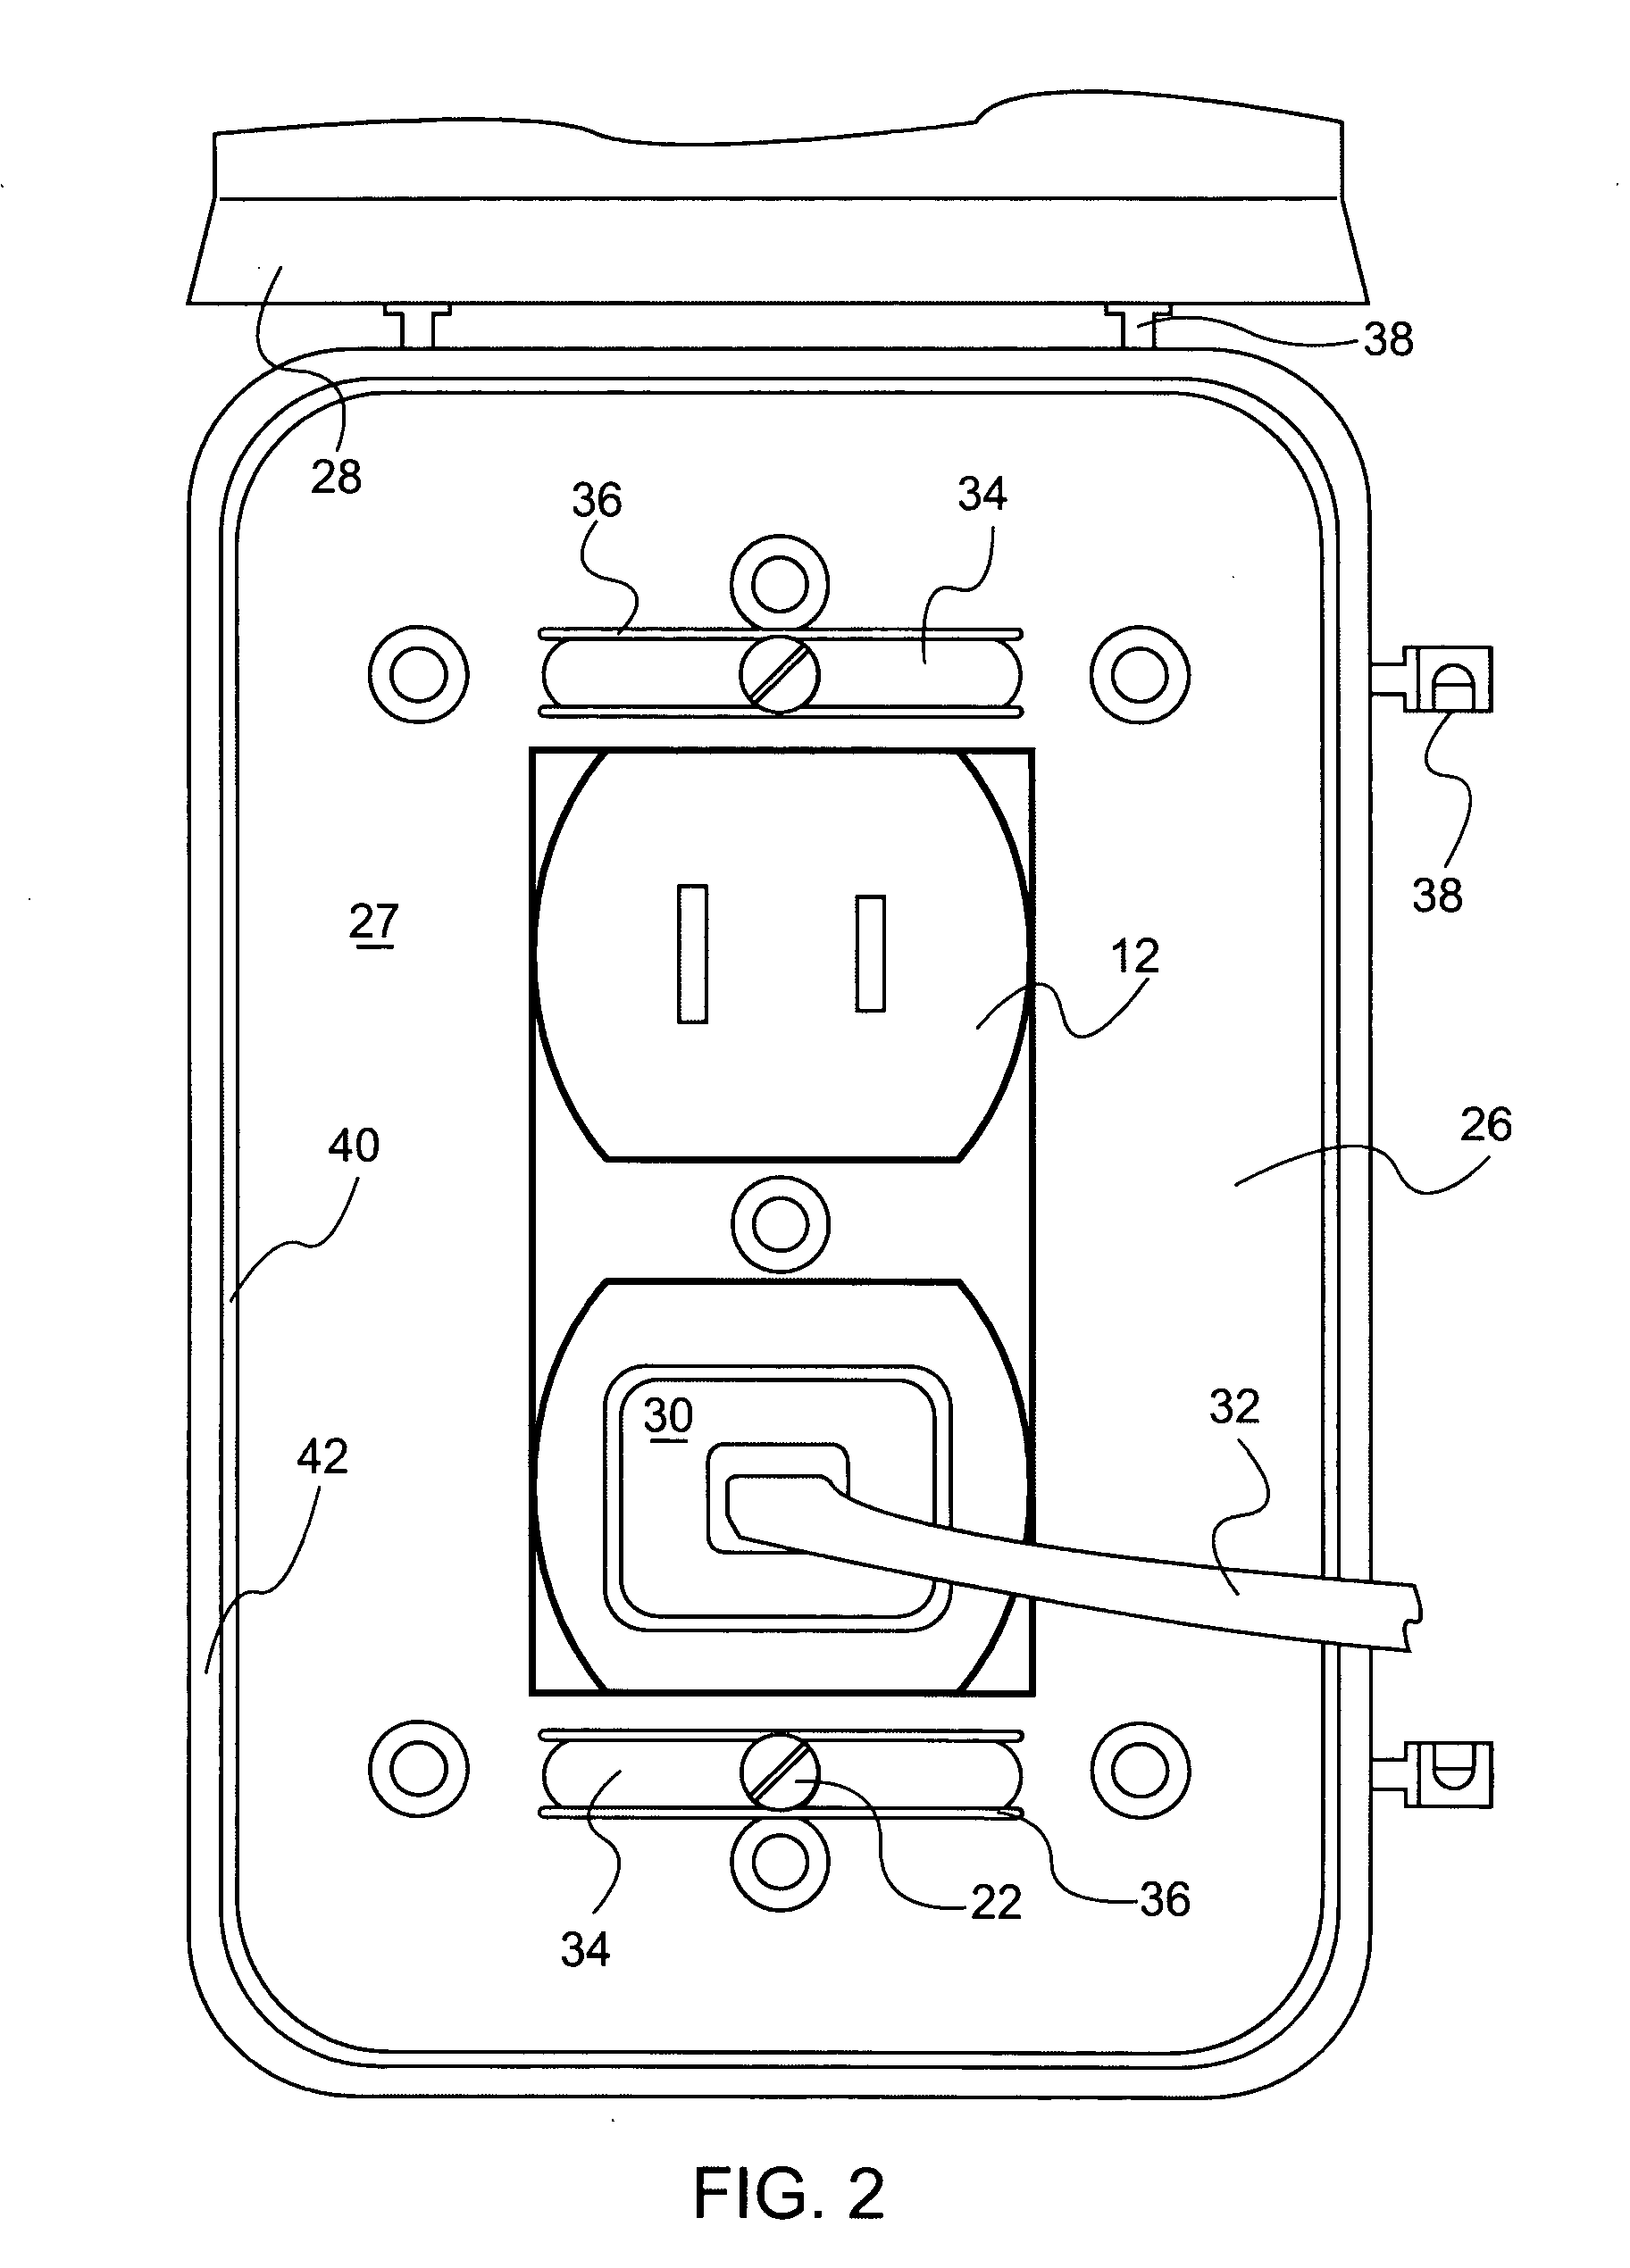 Base and electrical outlet having an expandable base mounting aperture and method for making same